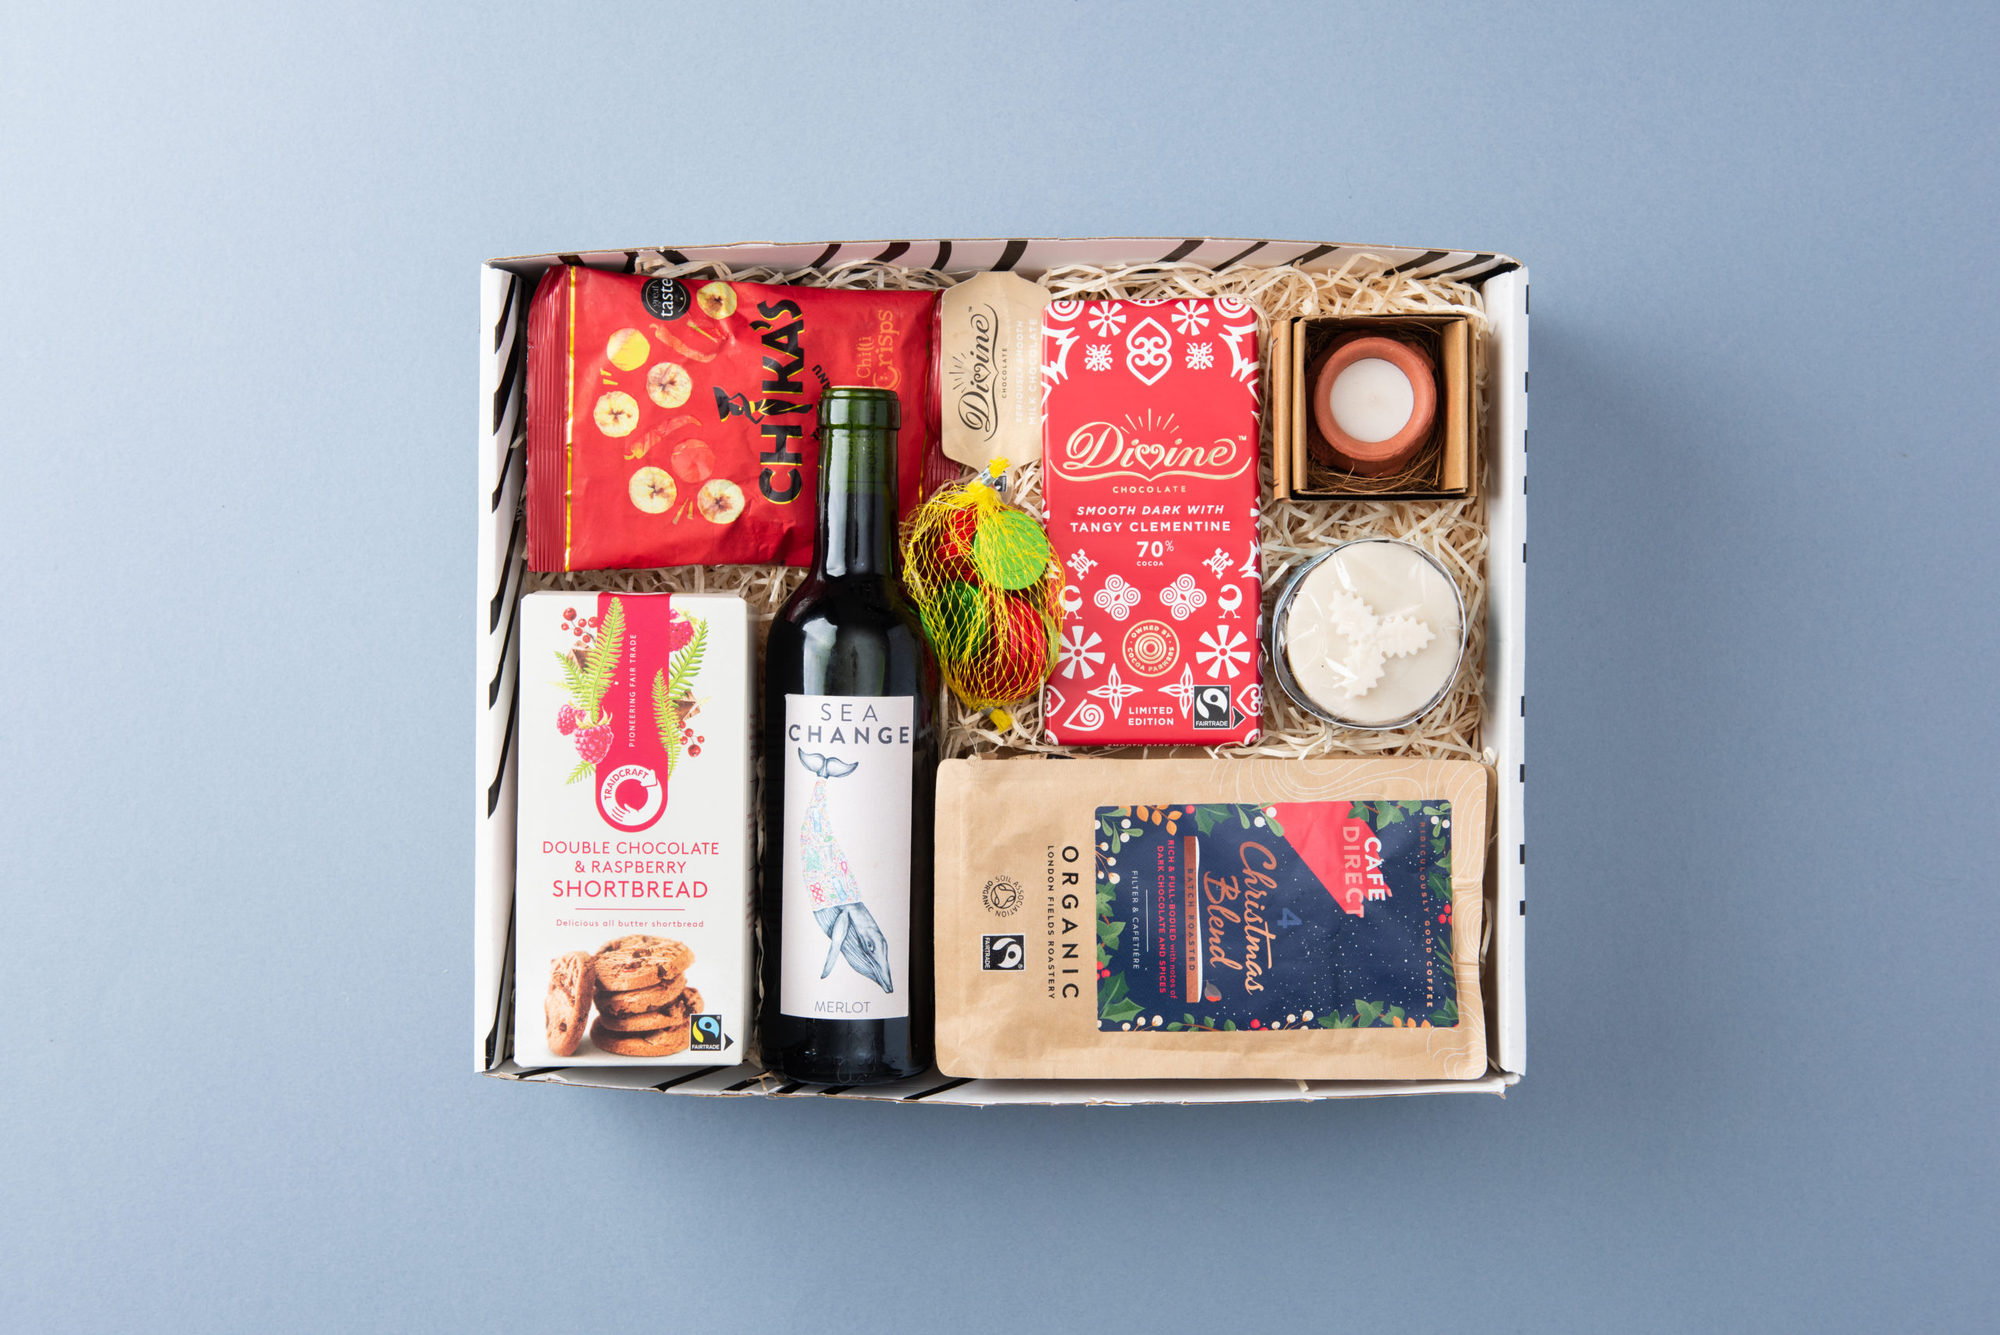 The Red Wine & Treats Gift Box